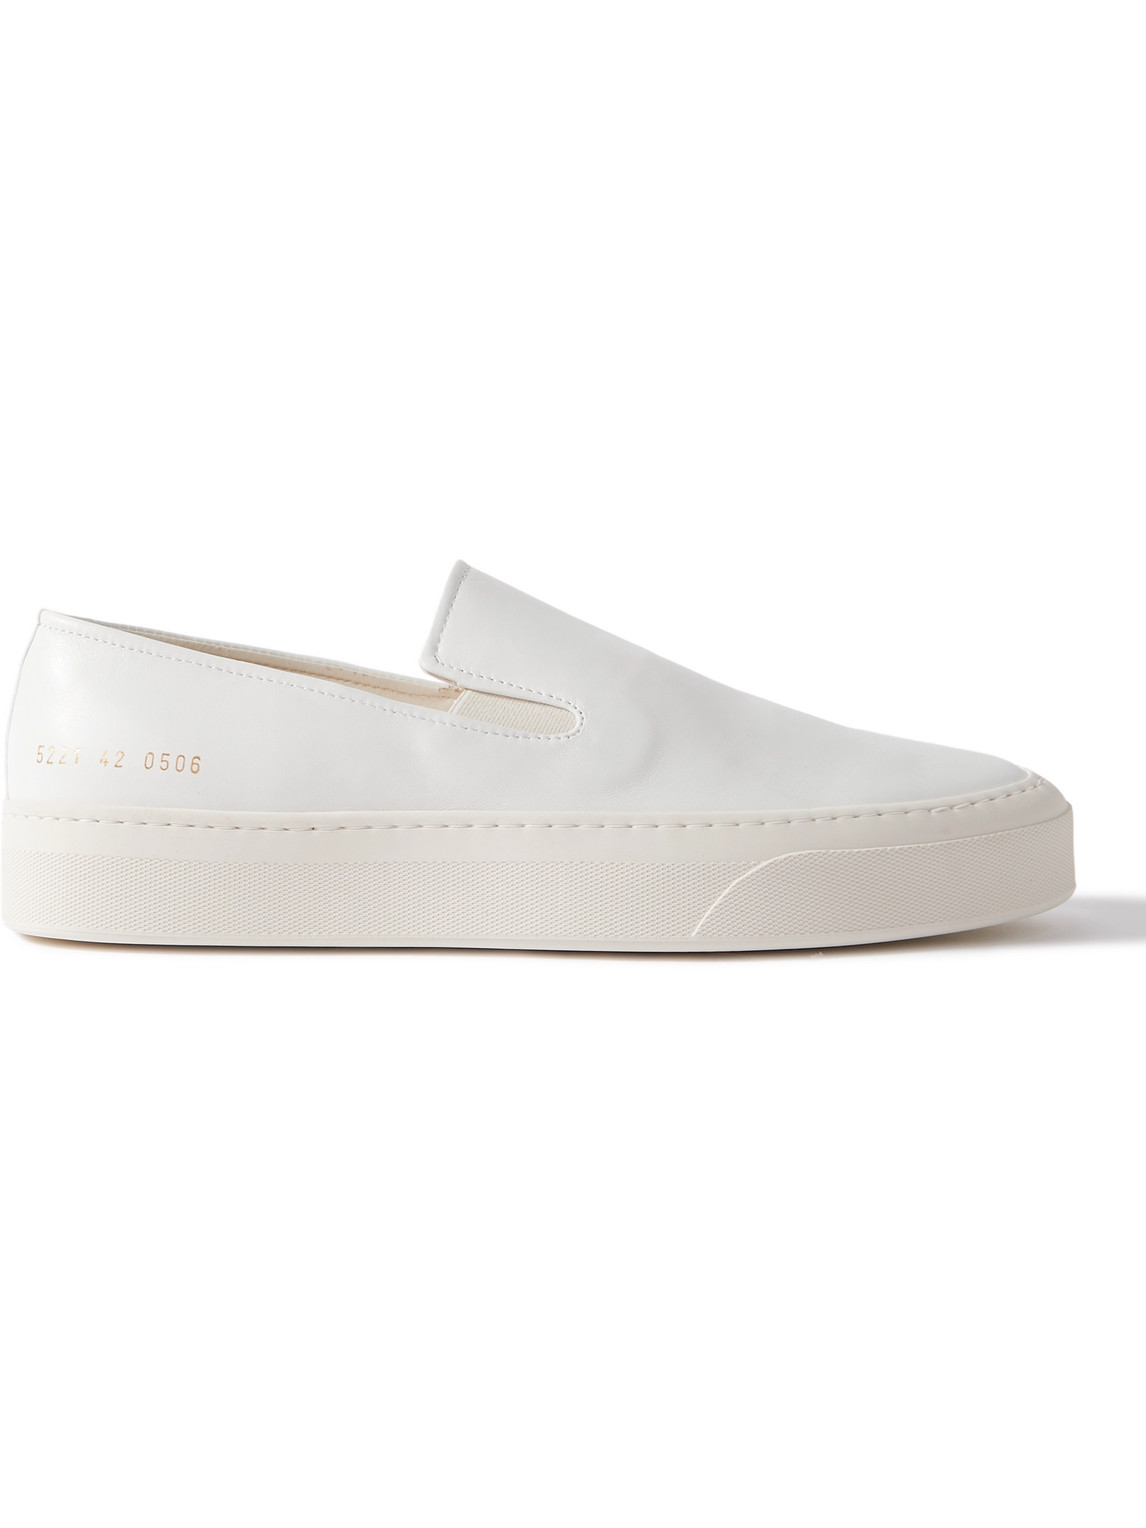 Common Projects Leather Slip-on Sneakers In White